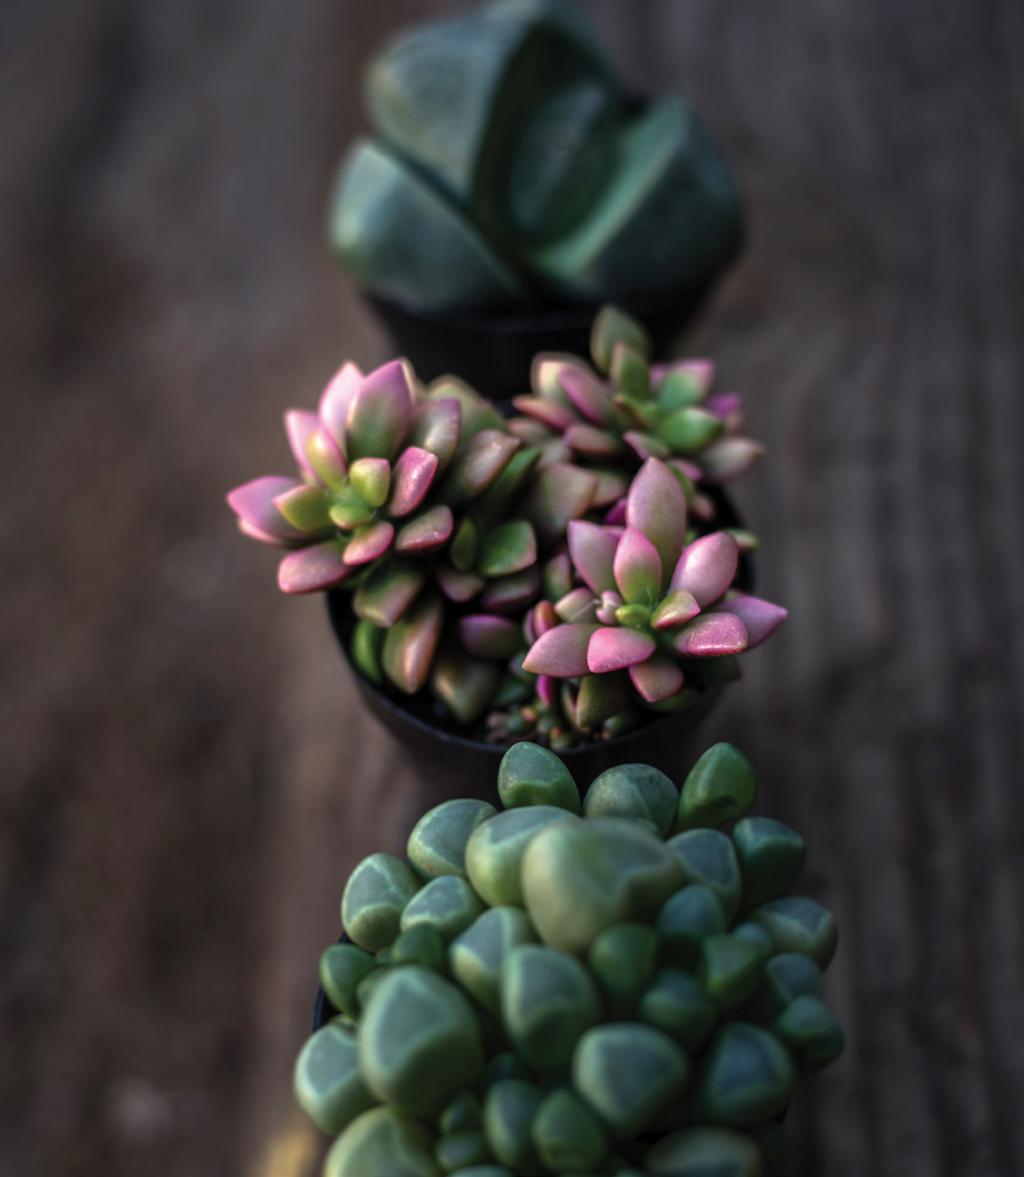 In 2017, Altman Plants was named by The Home Depot as its Supplier Partner of the Year for Outdoor Garden. Altman Plants e-commerce Customers can purchase succulents and cacti in 2.5 and 3.